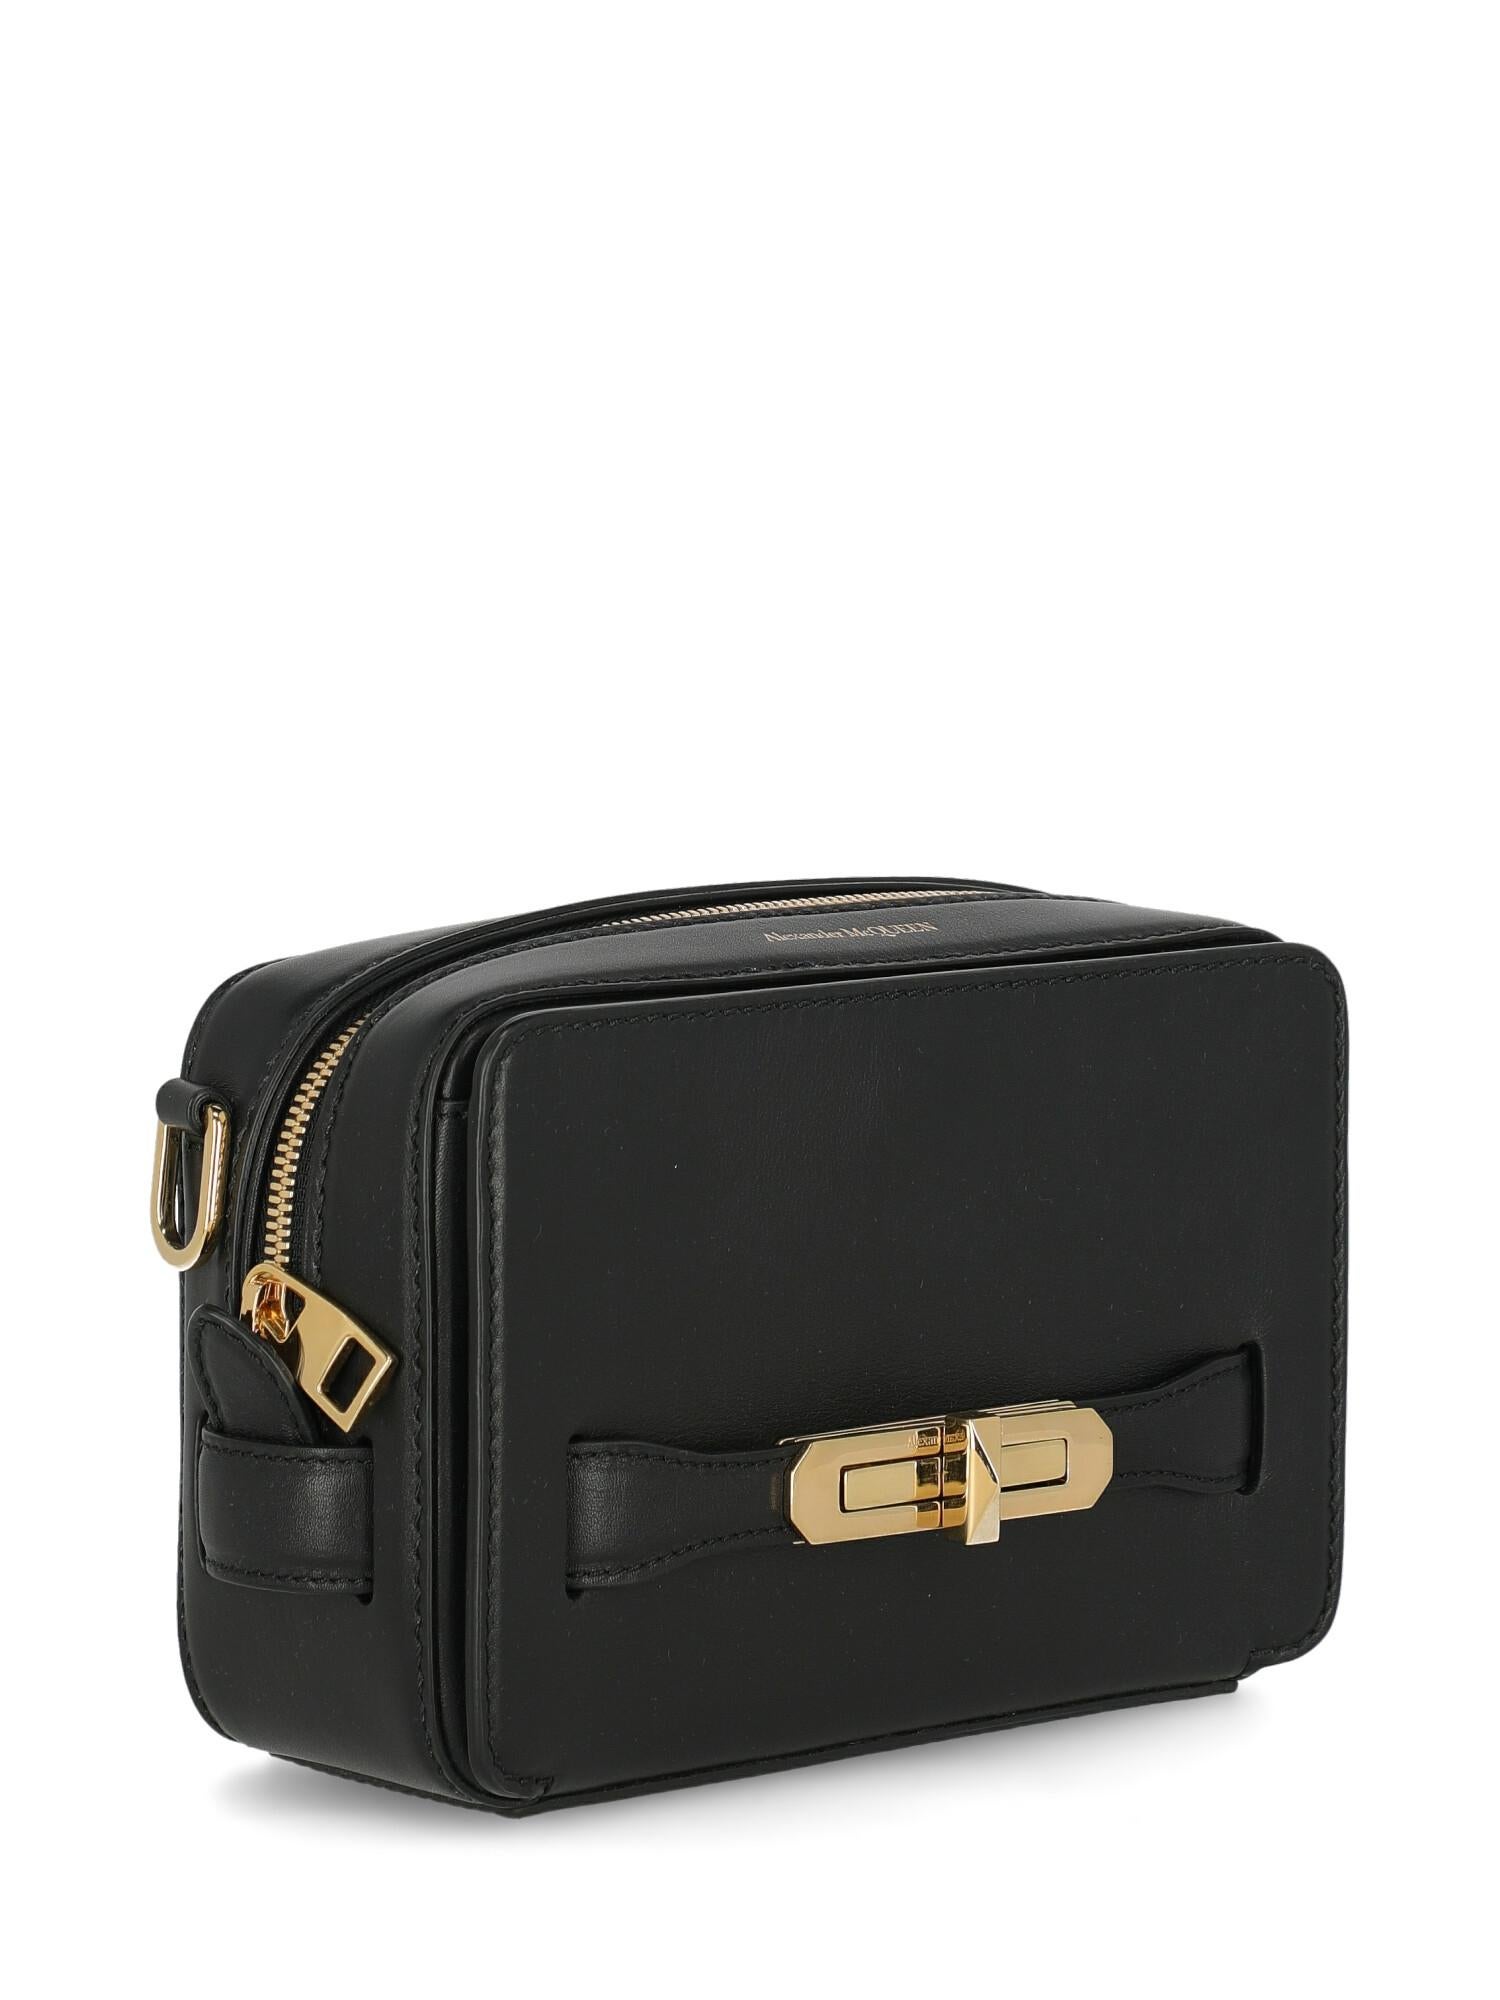 Alexander Mcqueen Woman Shoulder bag  Black Leather In Excellent Condition For Sale In Milan, IT